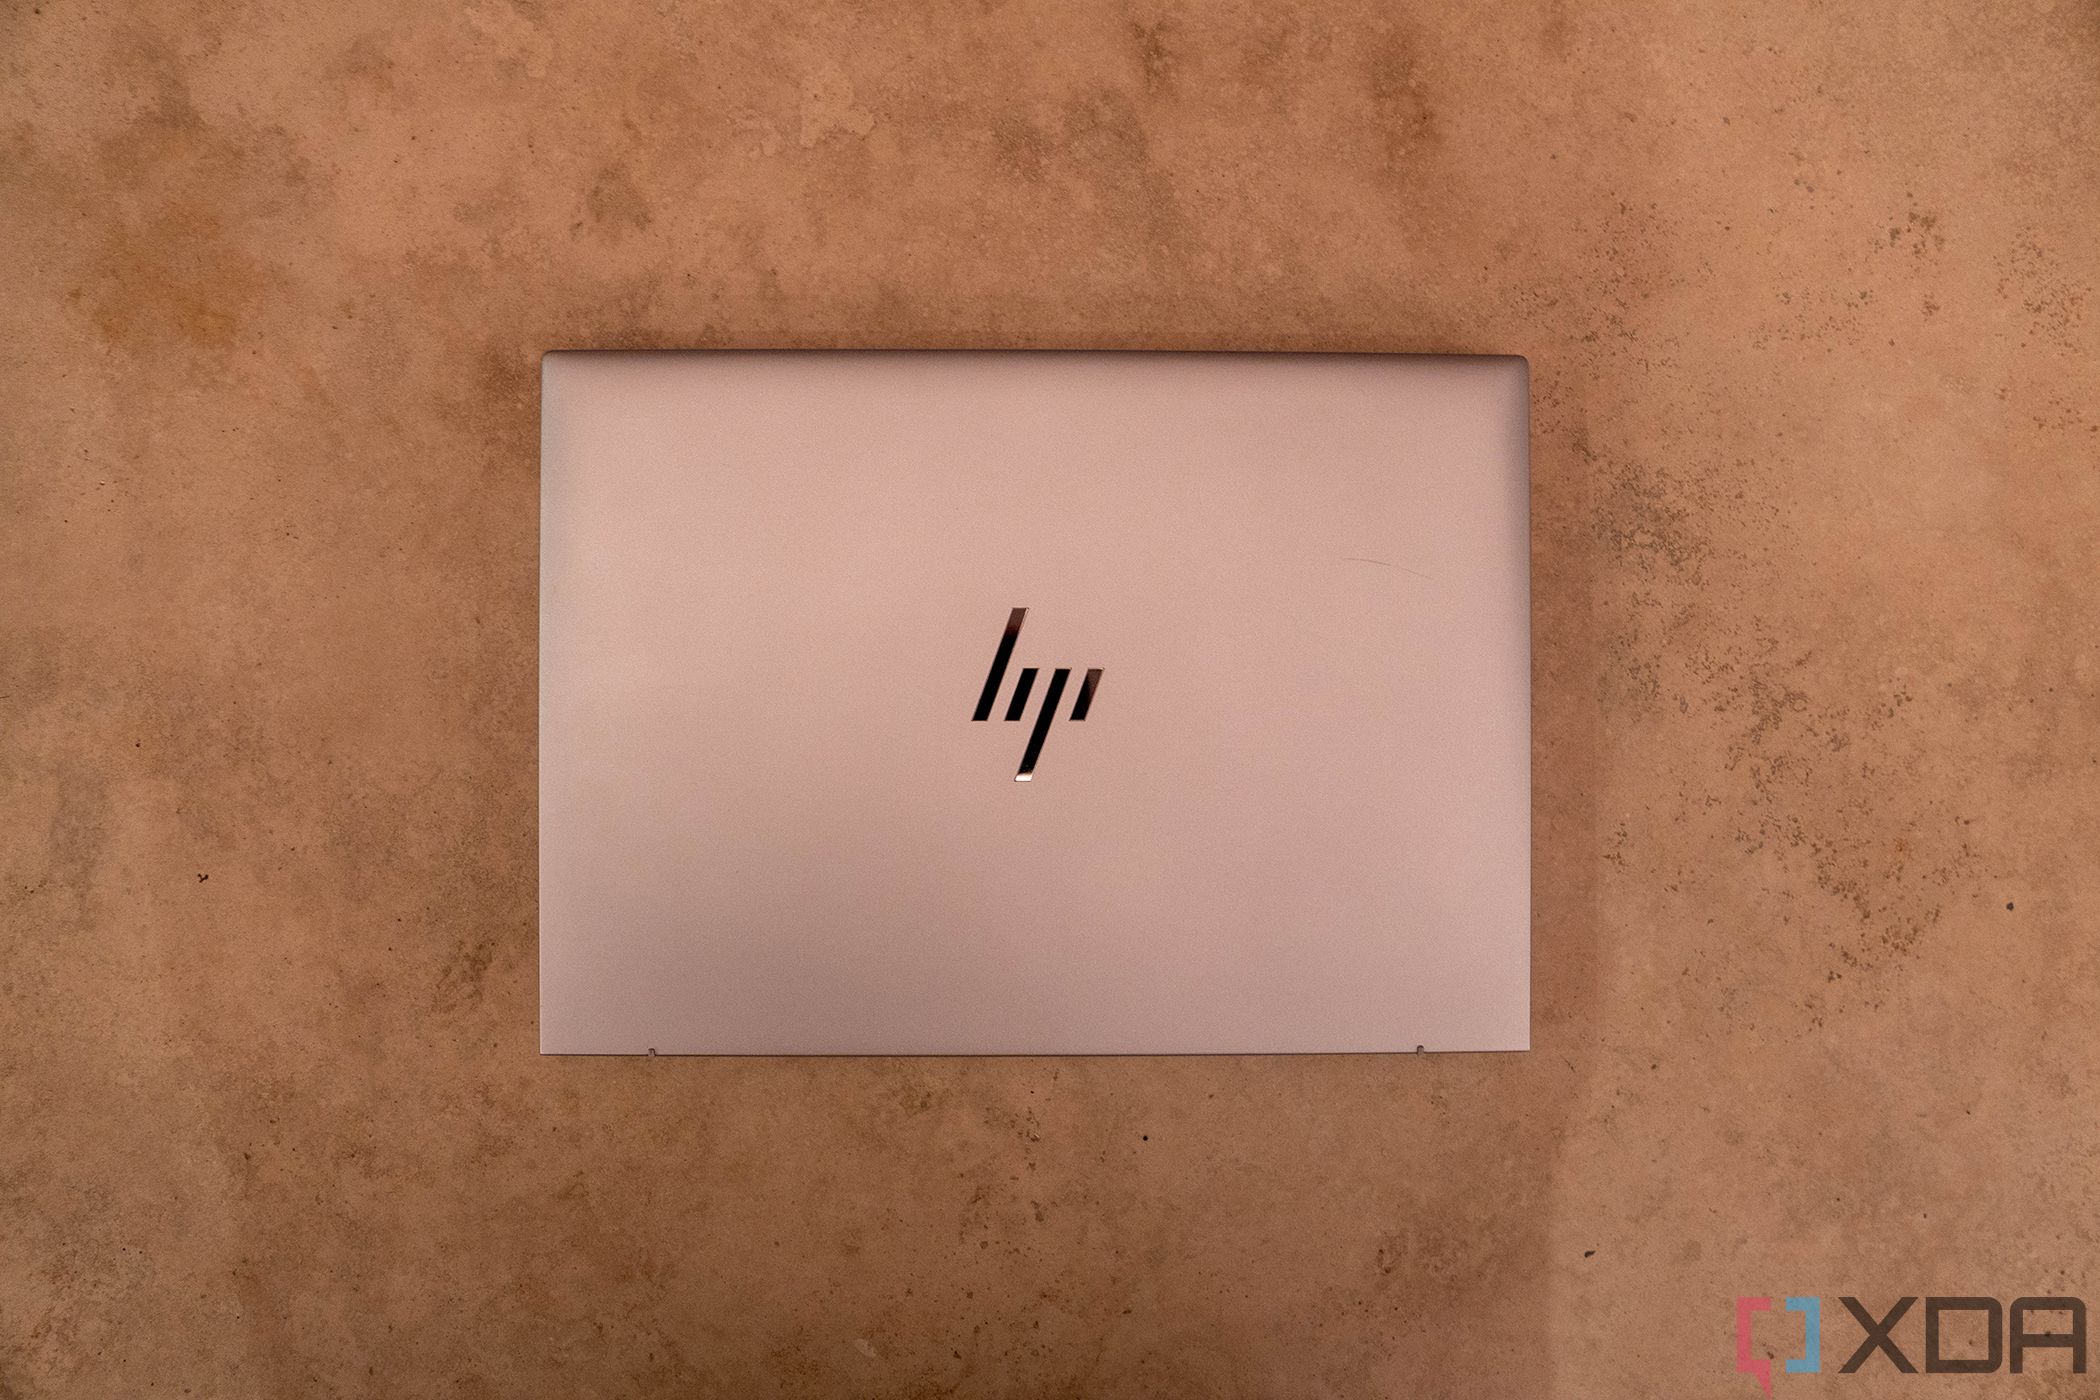 Top down view of silver HP laptop